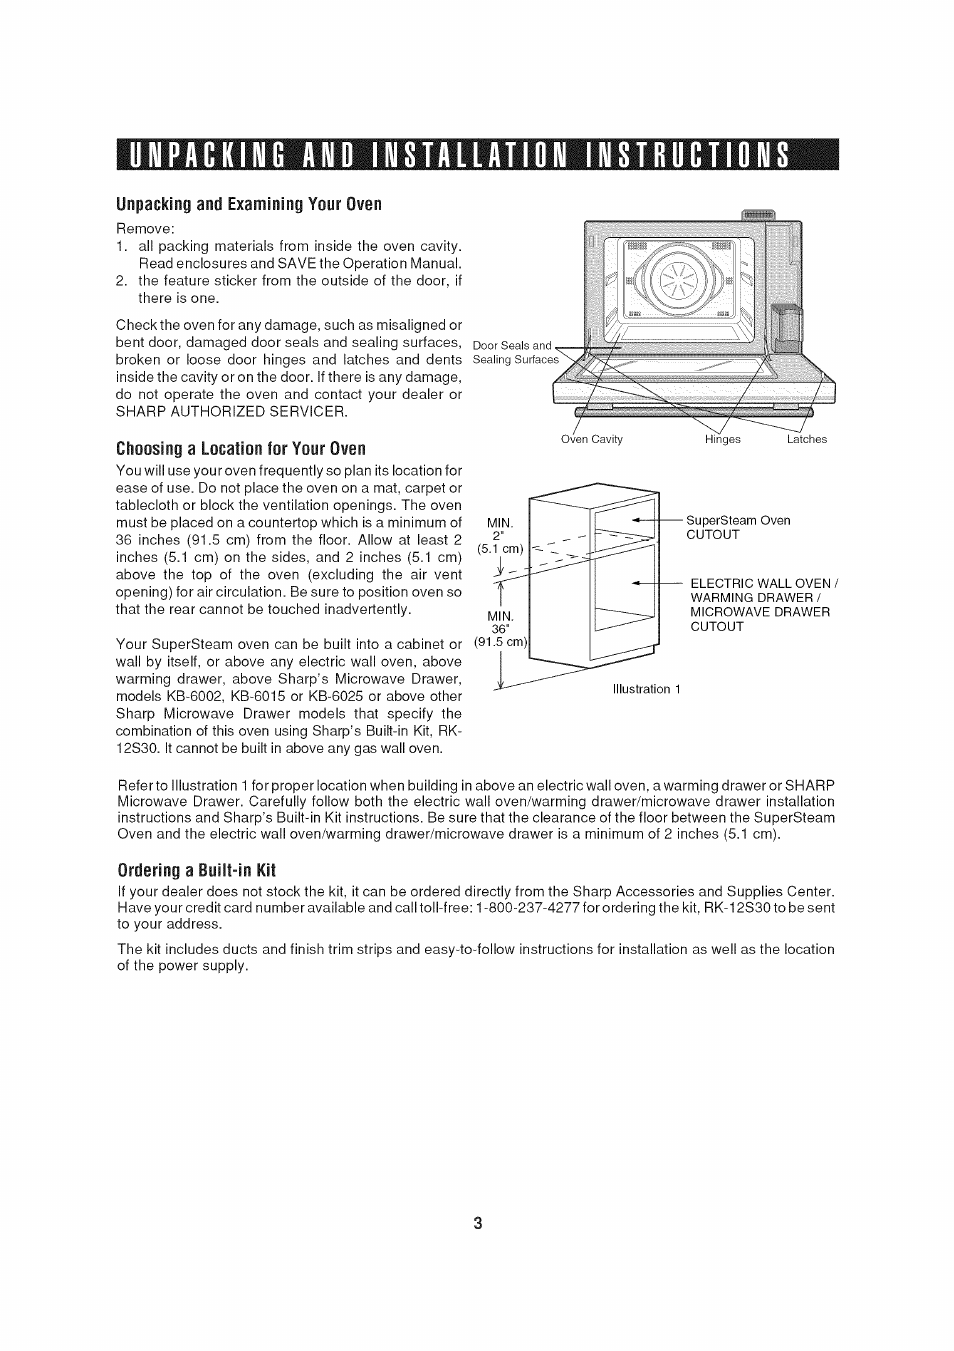 Unpacking and installation instkuctions, Unpacking and examining your oven, Choosing a location for your oven | Ordering a built-in kit | Sharp AX-1200 User Manual | Page 5 / 43